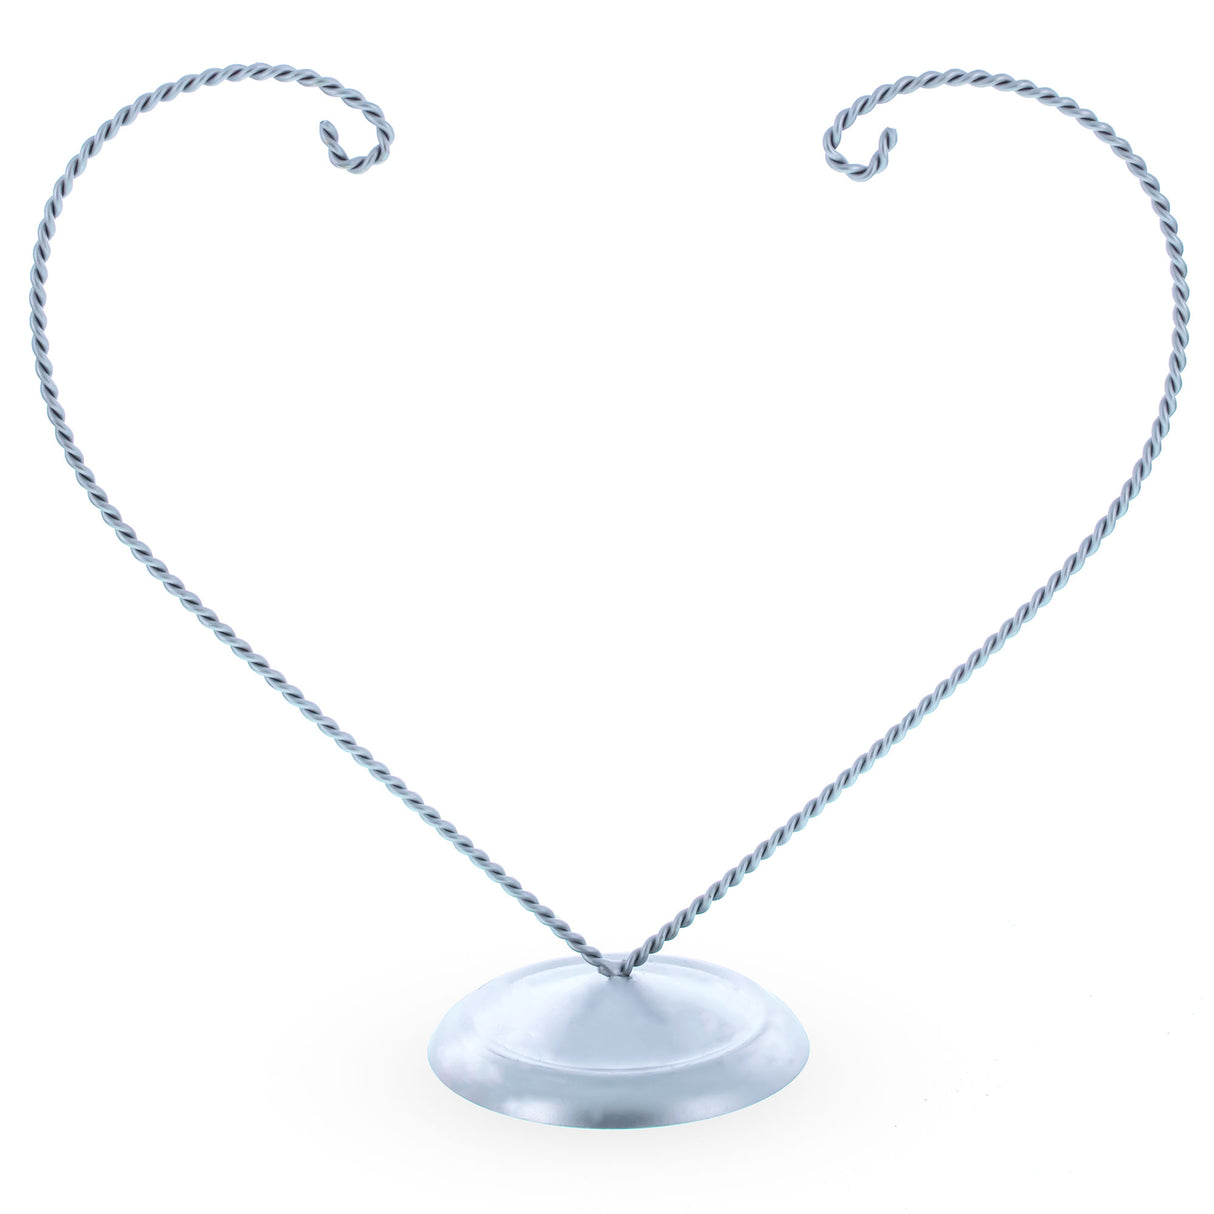 Distand Double Heart Silver Metal Solid Round Base Ornament Display Stand 9 Inches in Silver color,  shape